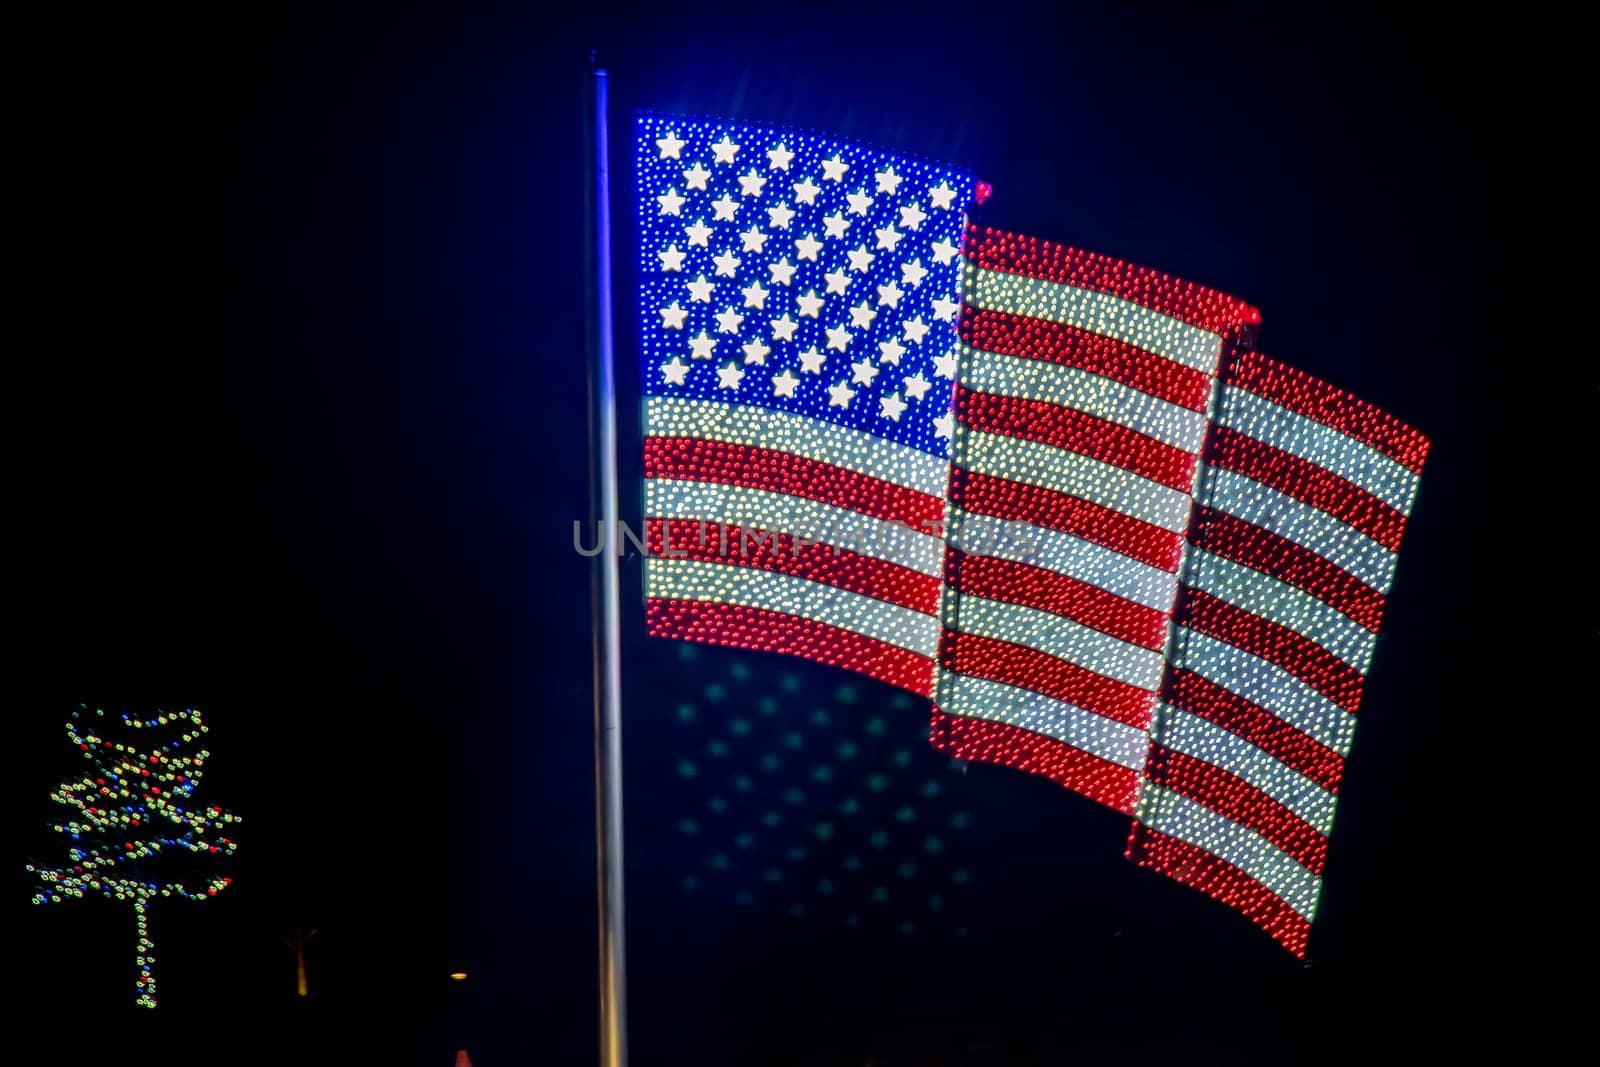 Nighttime Display Of Three American Flags Made Of Bright Lights Mounted On A Pole, With A Christmas Tree Light Display Visible To The Left Side.